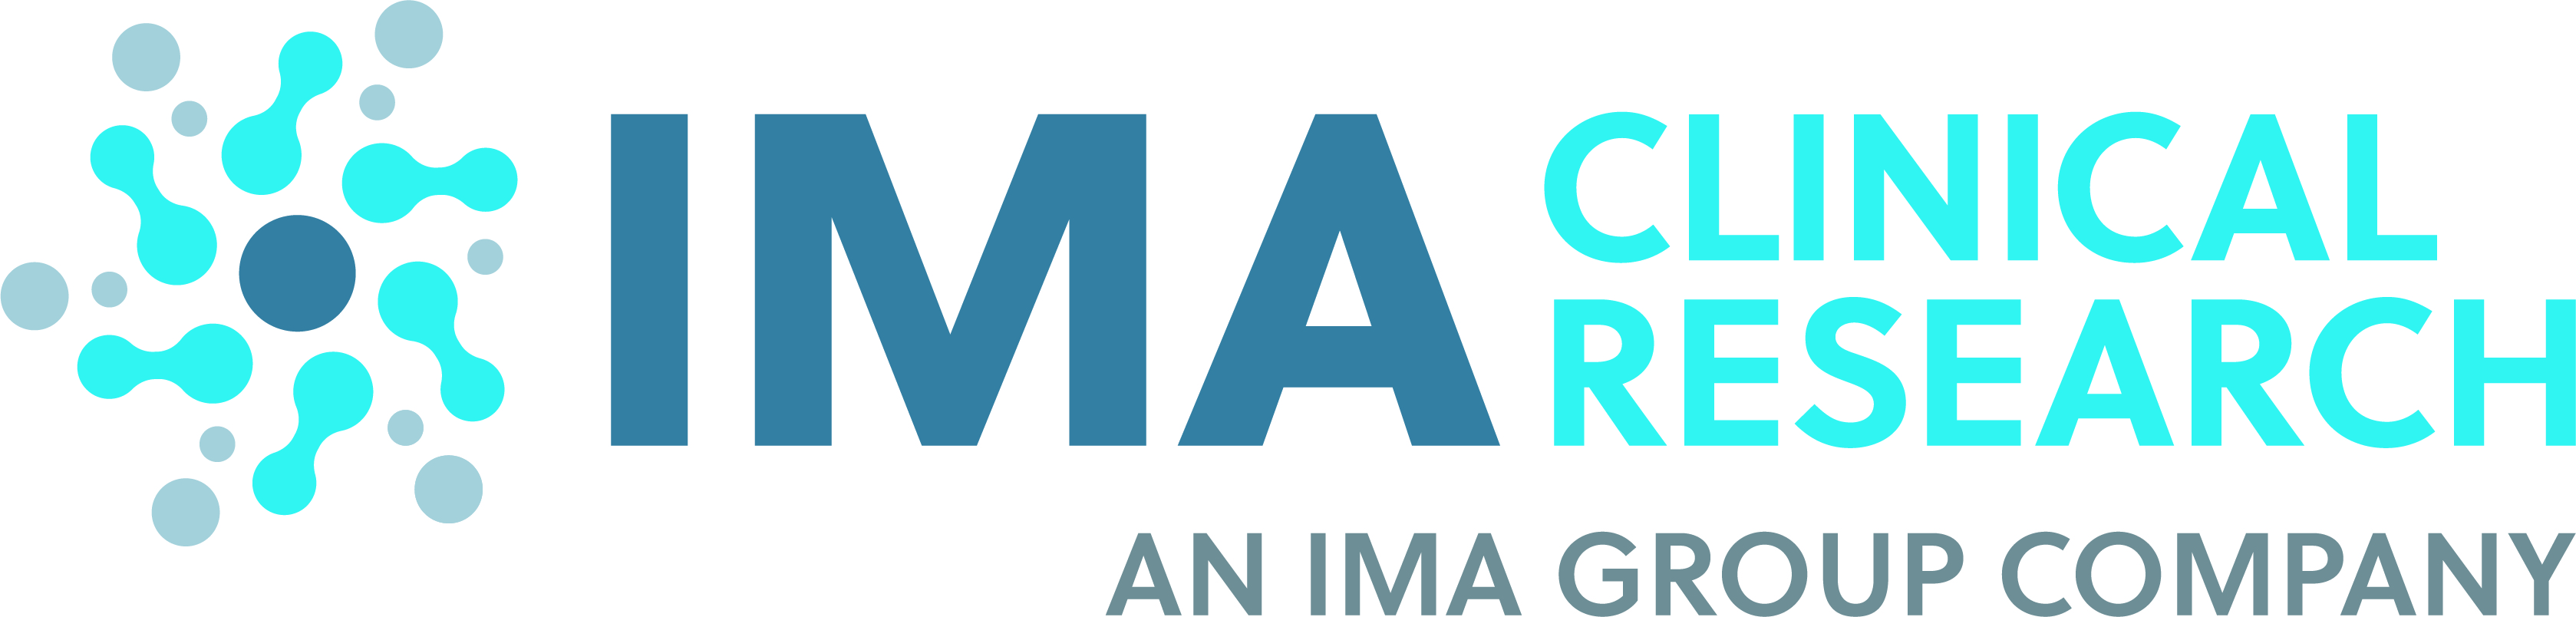 IMA Clinical Research (Parking Sponsor)